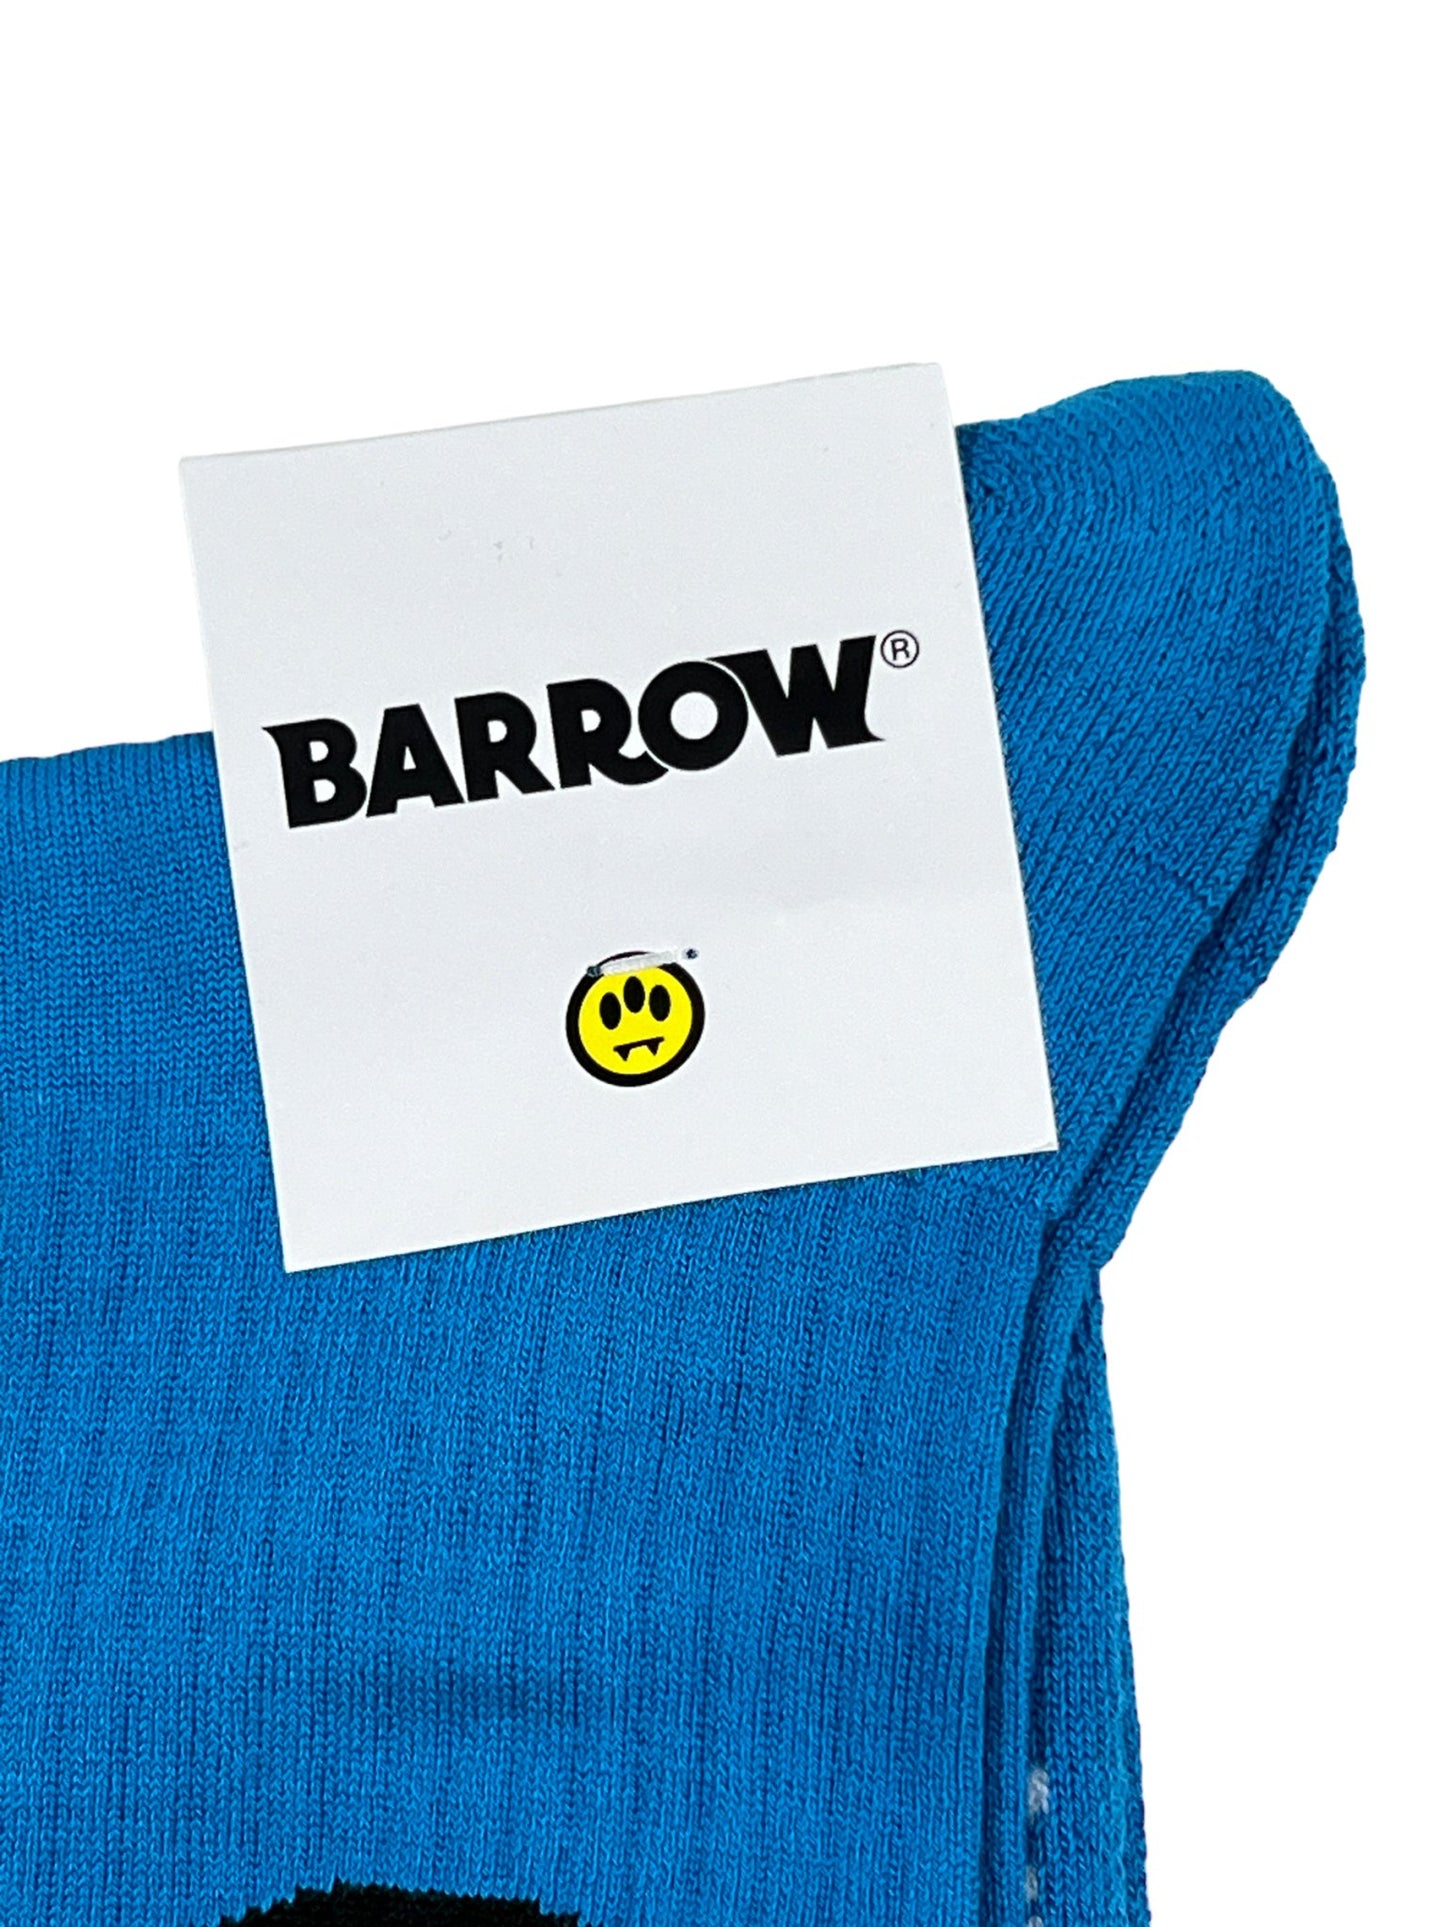 A blue BARROW S4BWUASO140 sock with a white "BARROW" logo tag featuring a yellow smiley face, made in Italy.